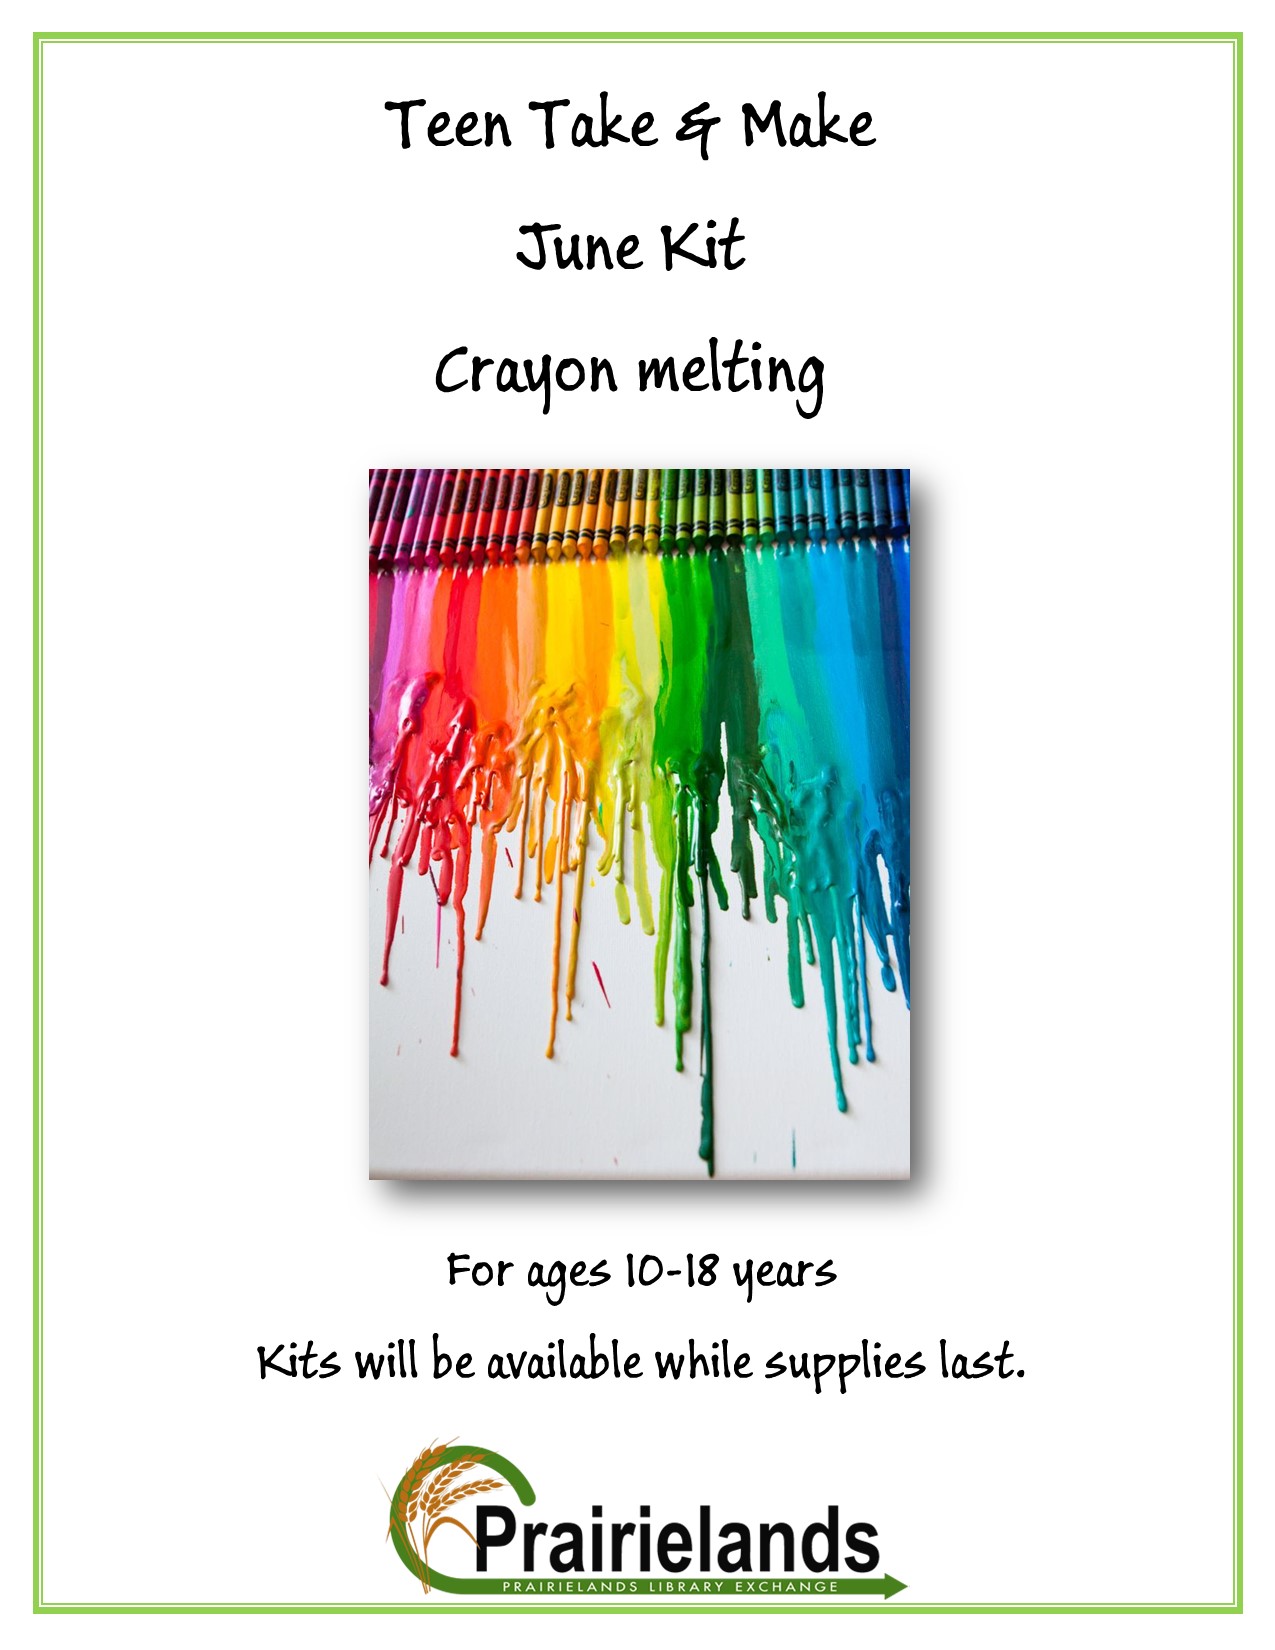 Take & Make Craft Kits Now Available! – Stirling-Rawdon Public Library